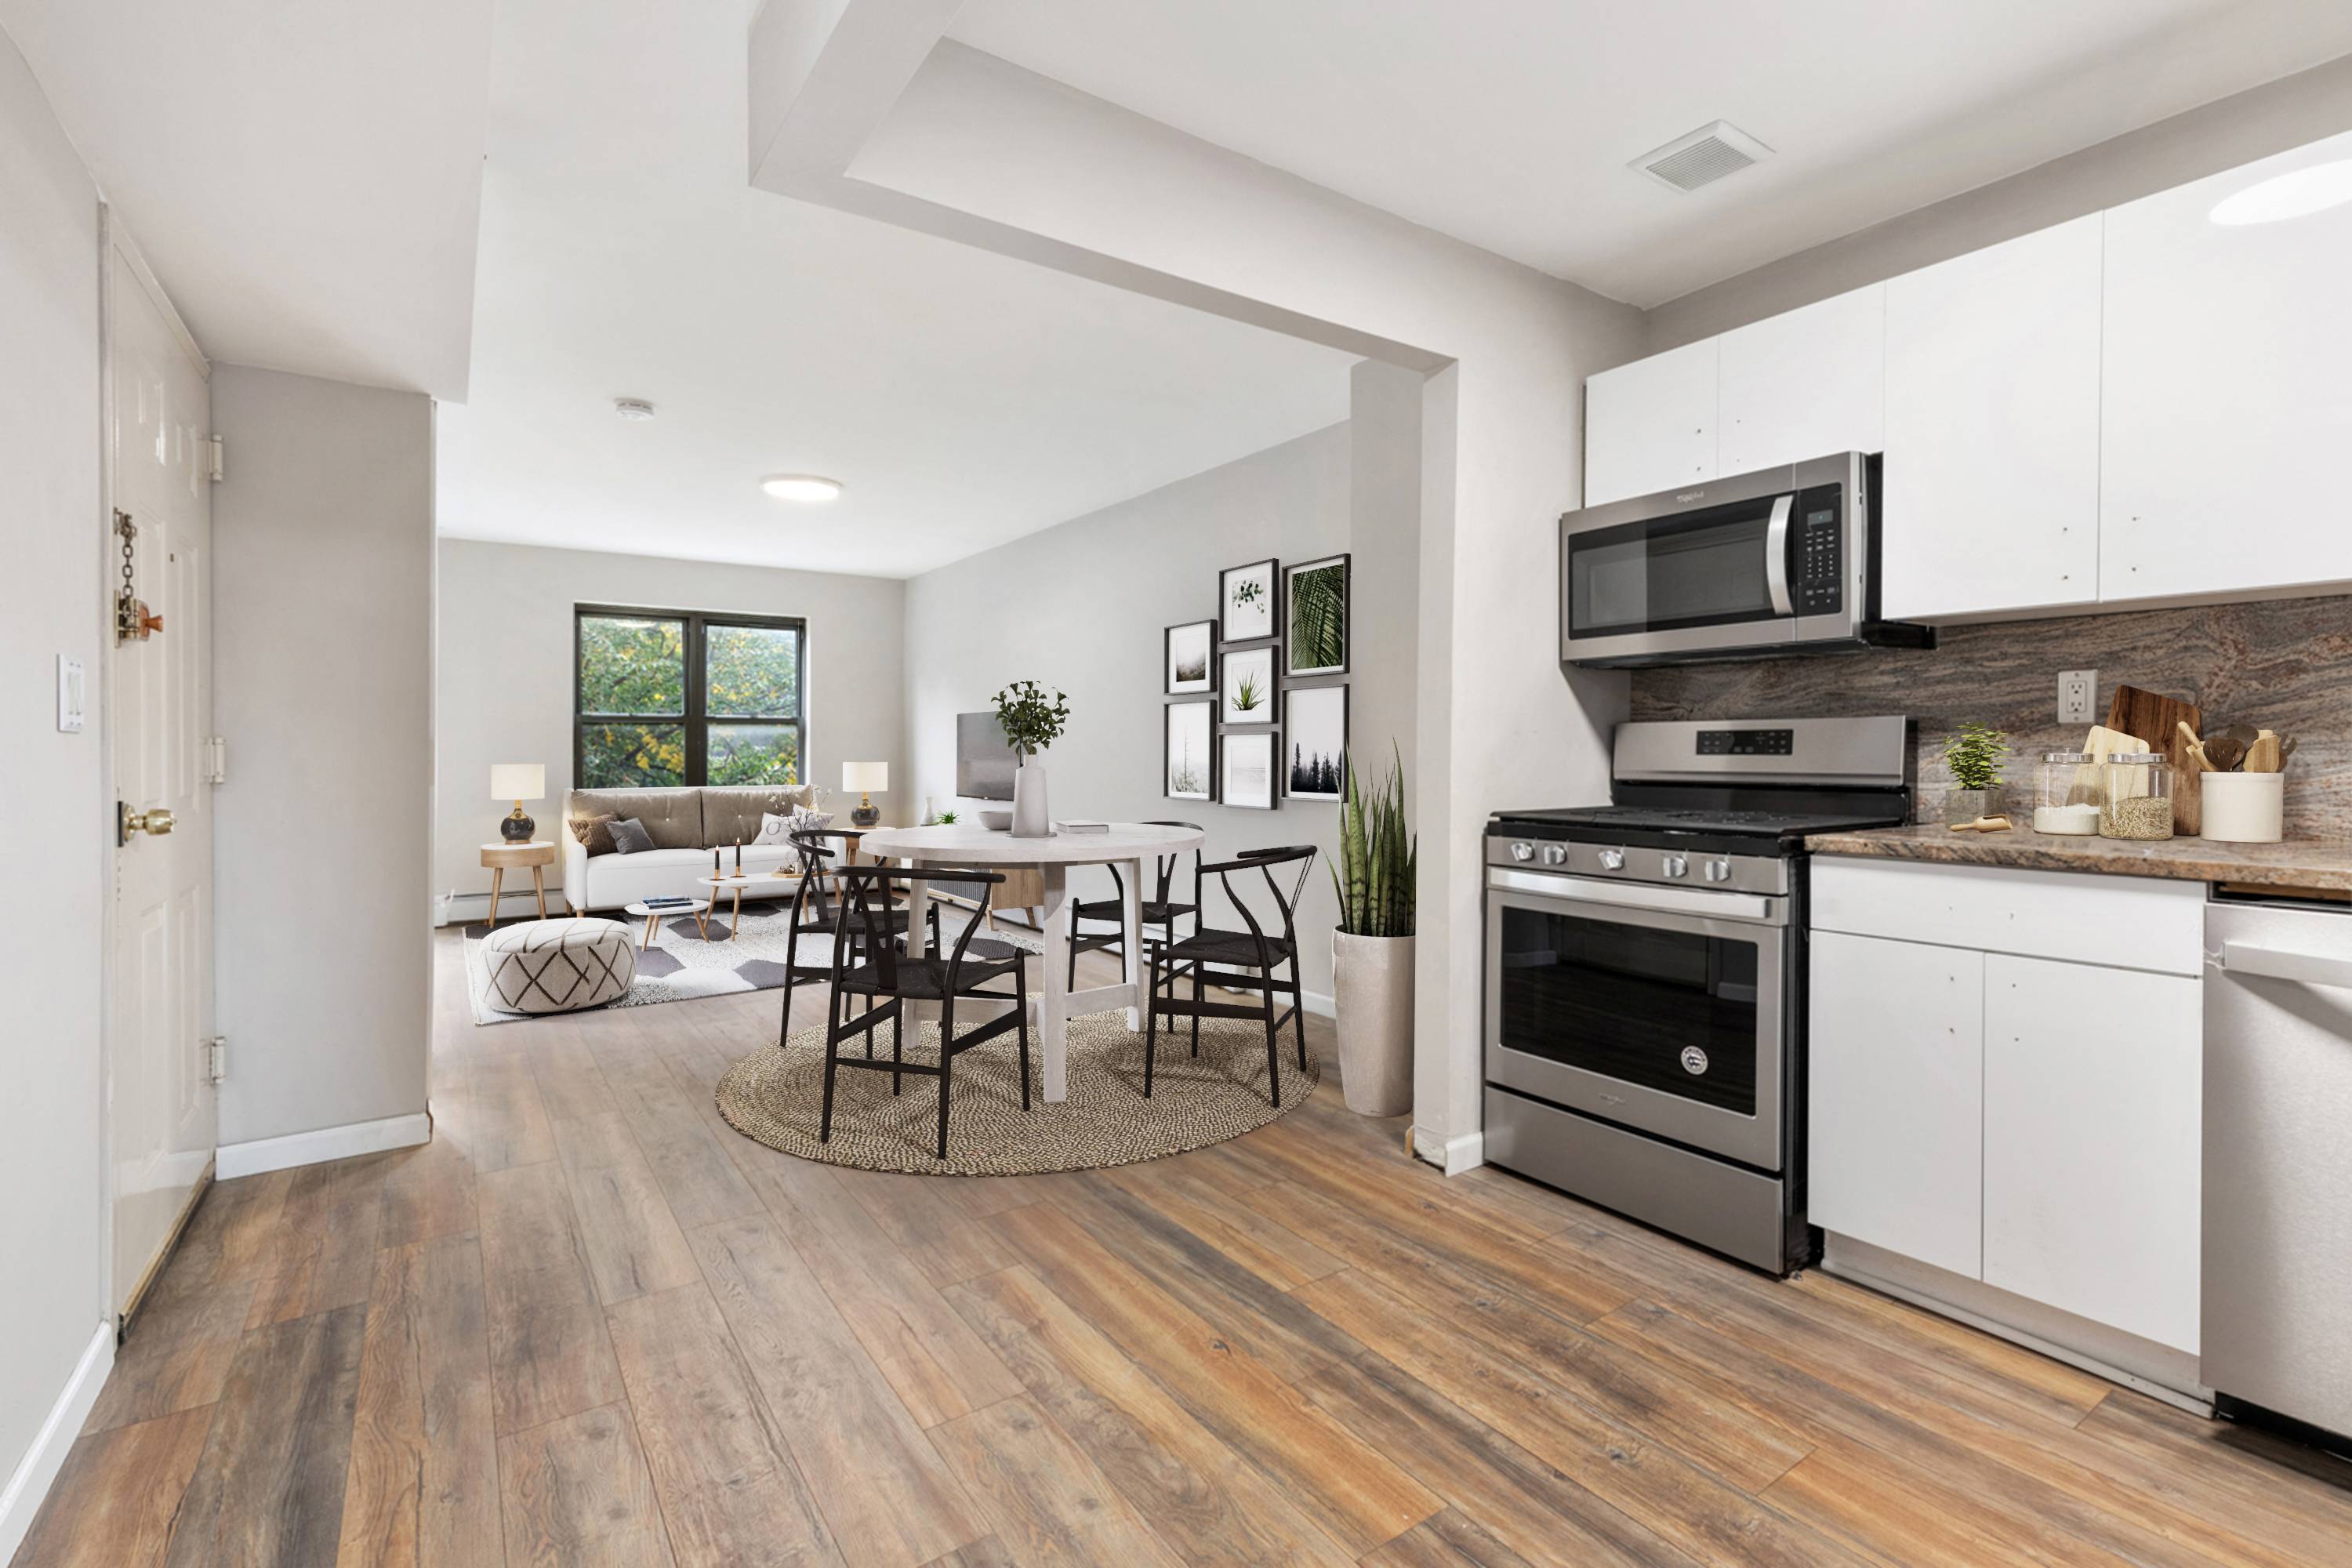 Space and affordability in the heart of Crown Heights.